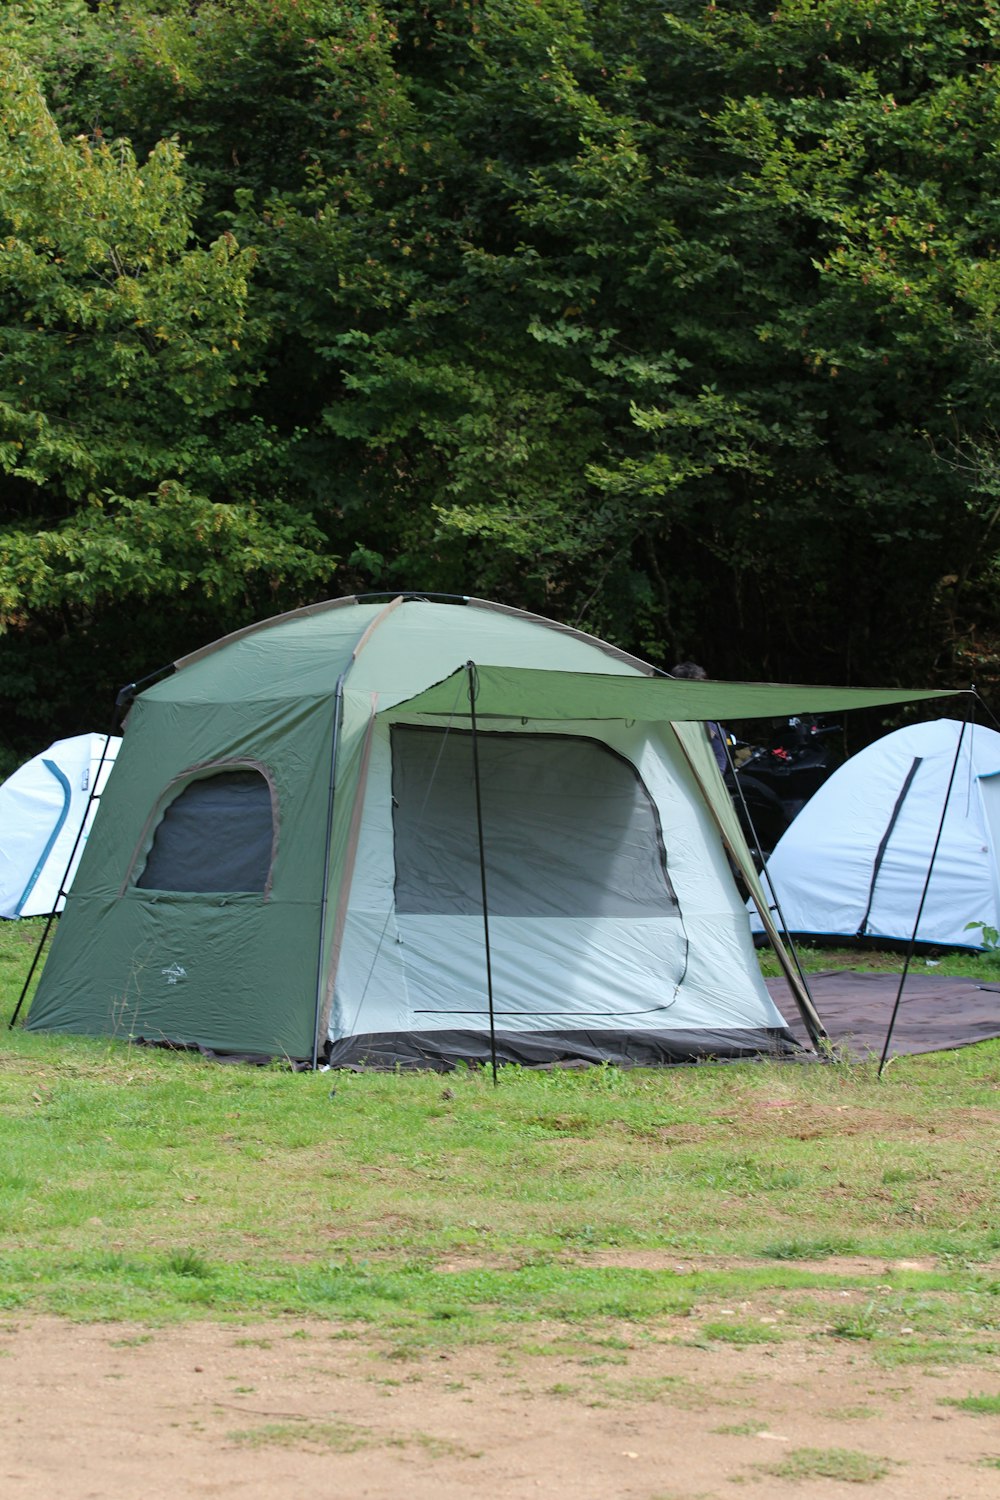 a group of tents set up in a field